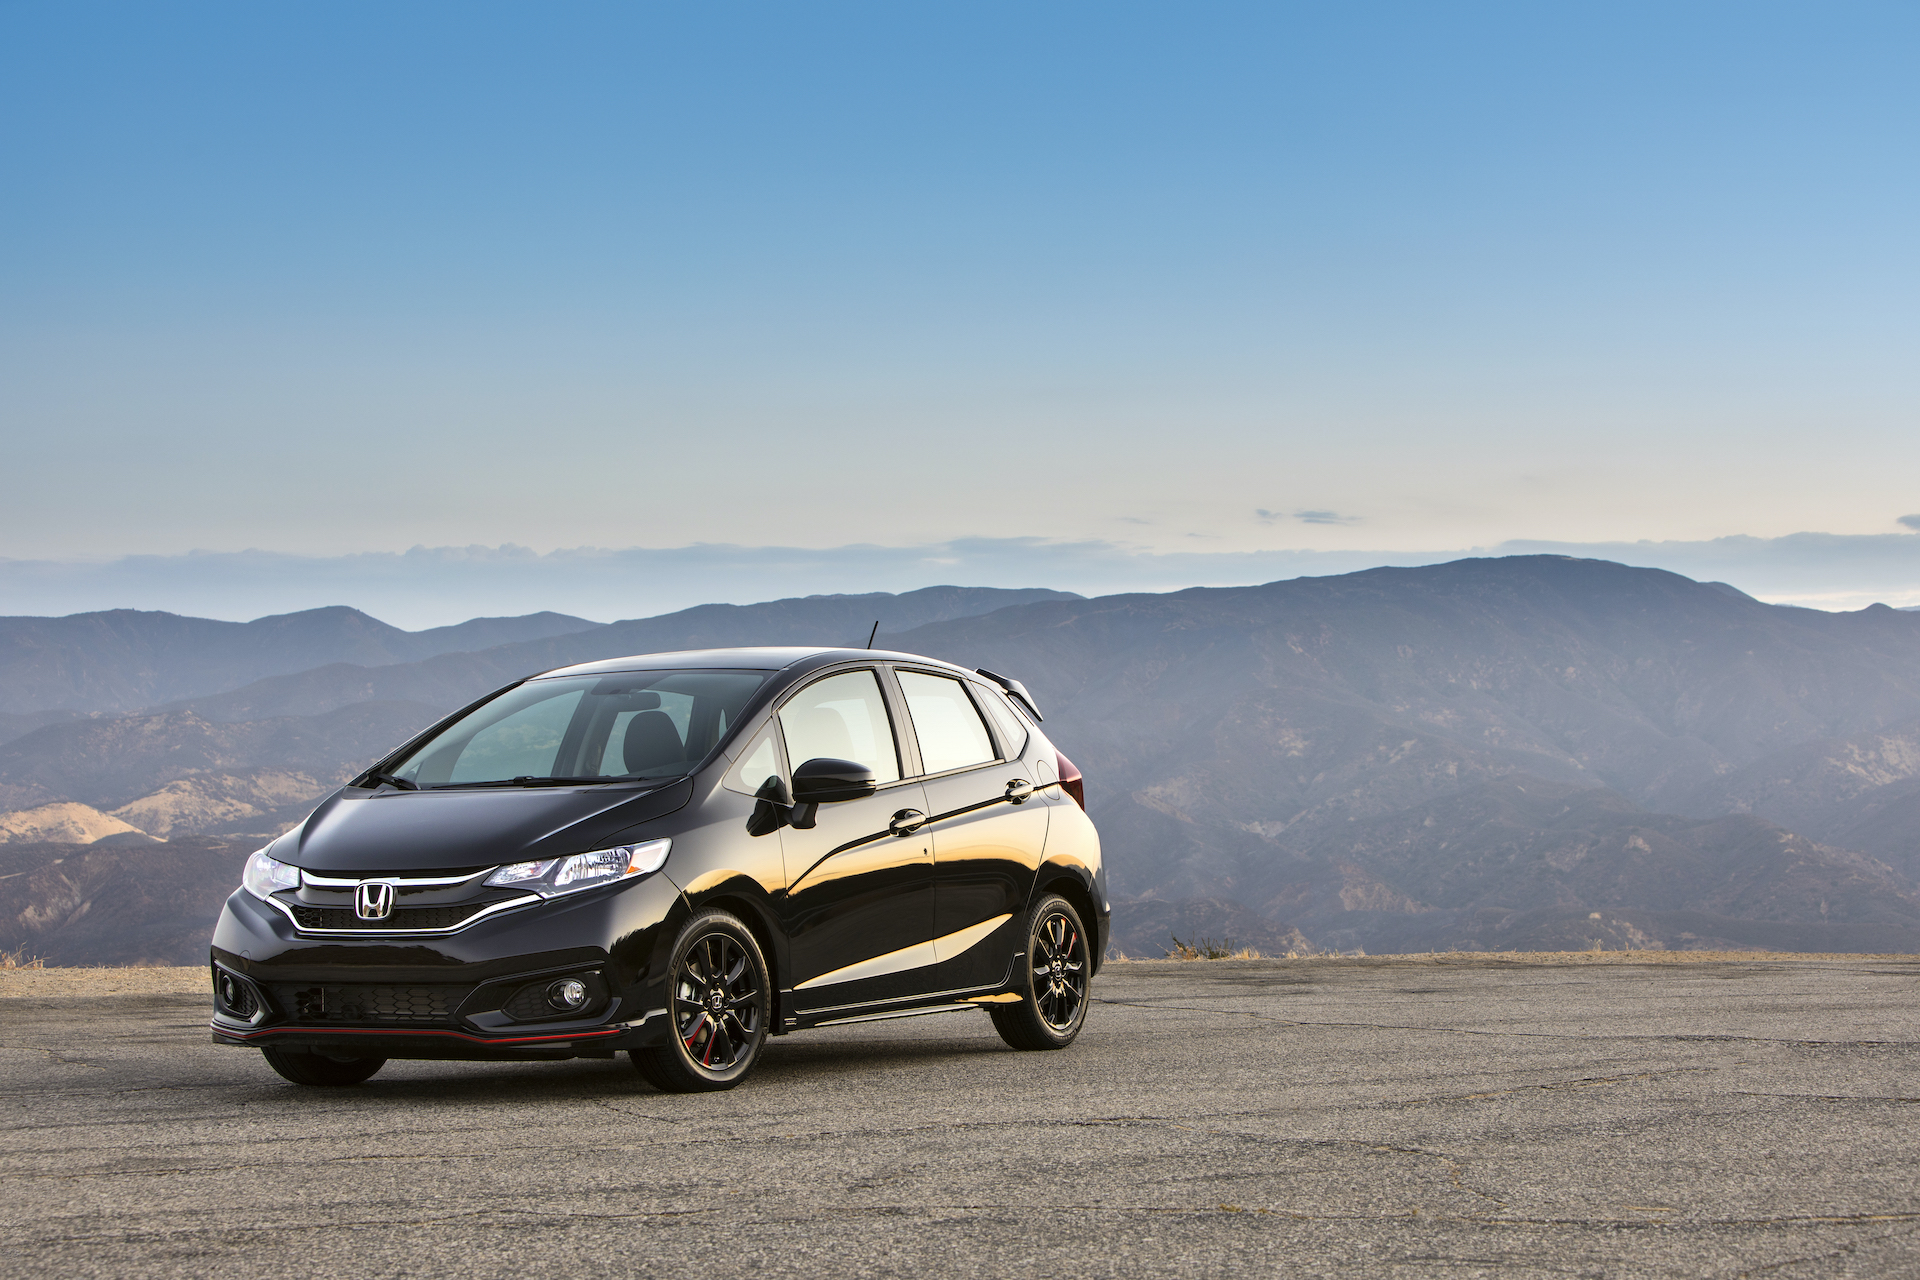 Honda Fit and Toyota Yaris dumped: Have Americans rejected the  fuel-efficient small car?